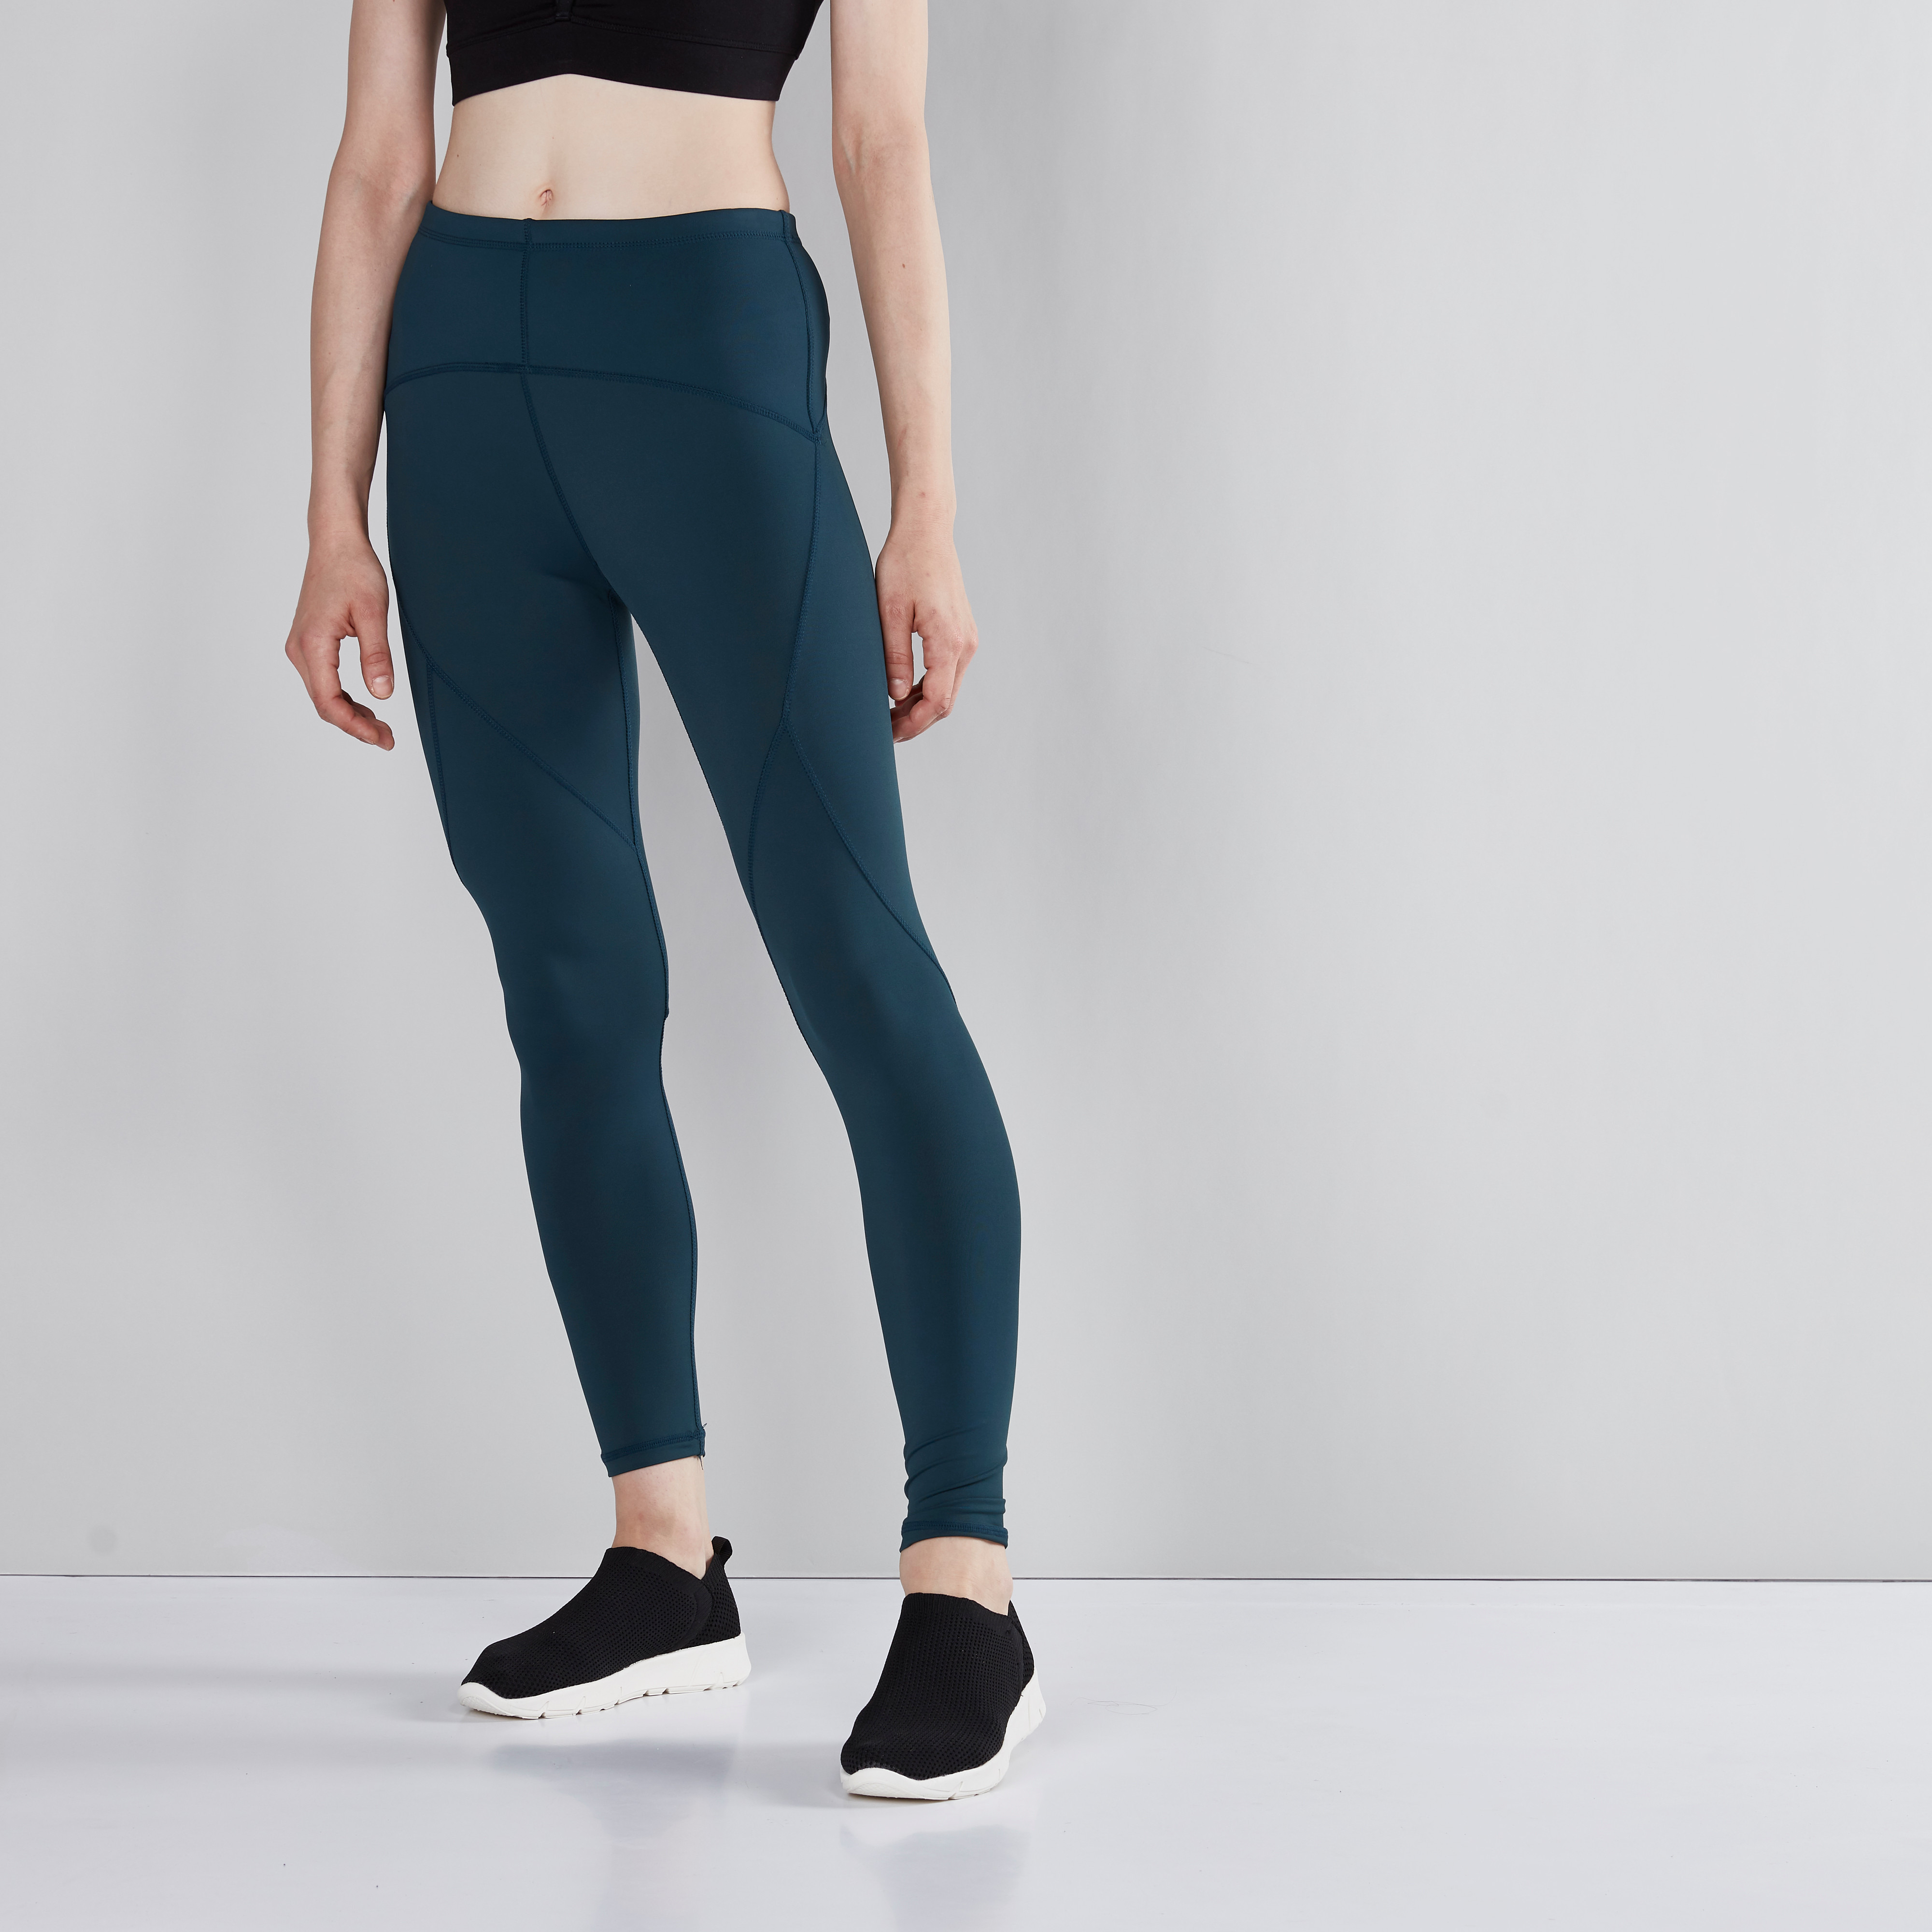 Buy Melisa Ankle Length Leggings (Pack of 2) Warm Casual Wear Online at Low  Prices in India - Paytmmall.com